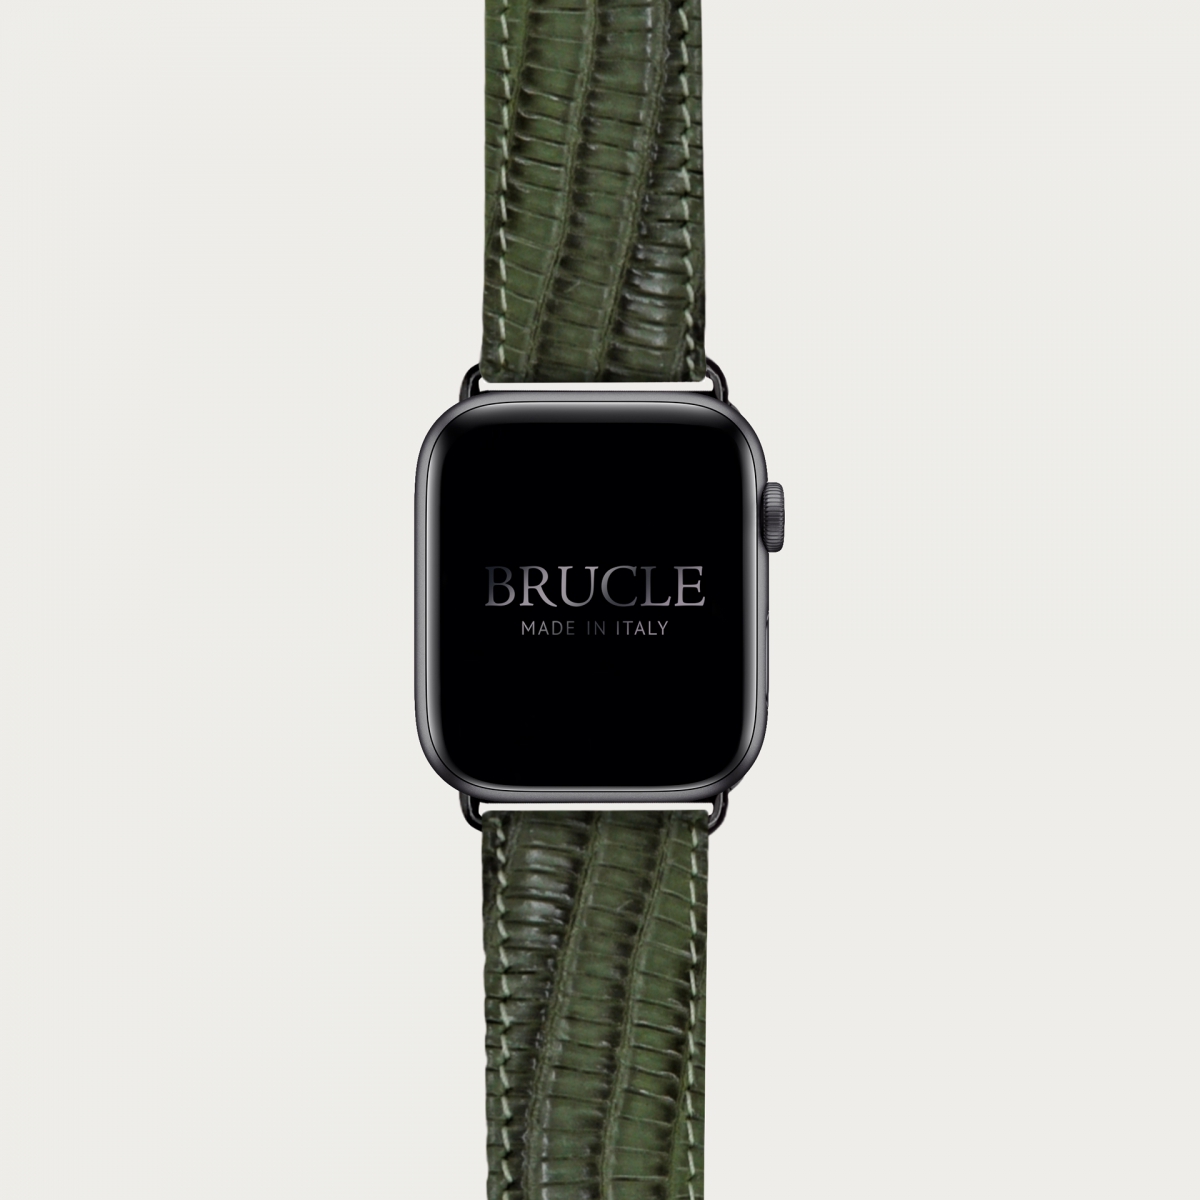 Leather Watch band compatible with Apple Watch / Samsung smartwatch, green lizard print